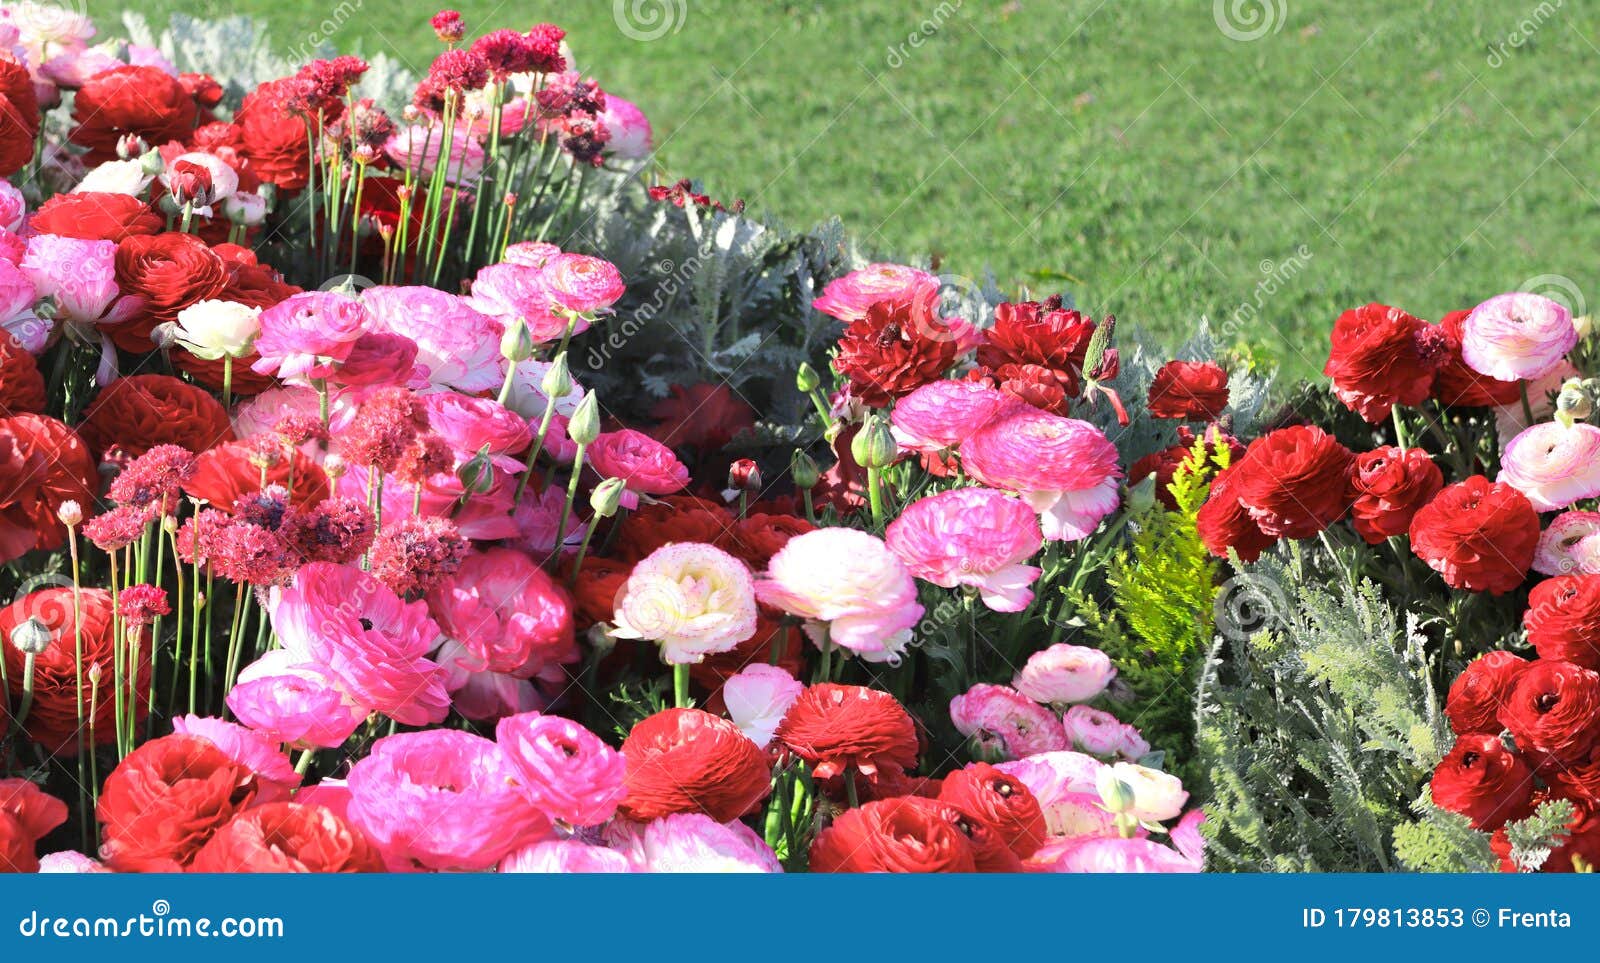 Ranunculus Flowers On Flowerbed Stock Image Image Of Blooming Blossoming 179813853